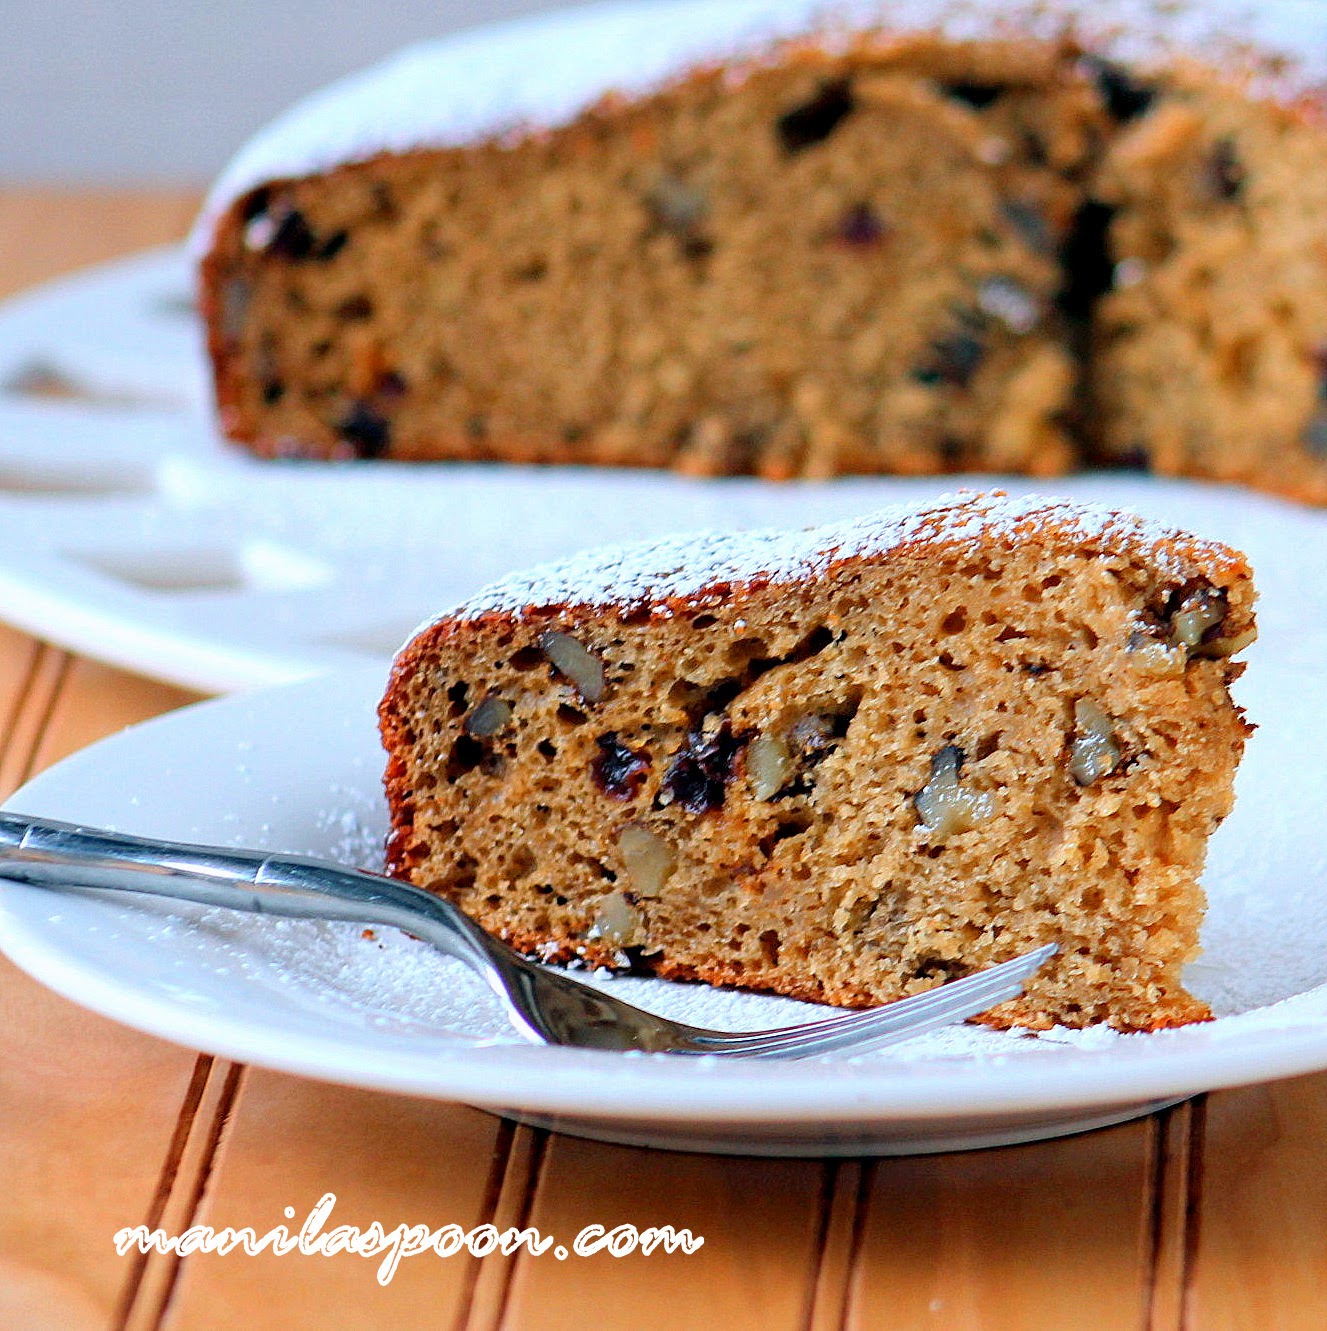 No oil or butter is used in this cake yet it comes out so moist and tasty! Perfectly spiced with cinnamon and nutmeg with added fruity goodness from raisins and crunch from walnuts, it's the perfect cake for coffee or tea time! #applesauce #cake #sweets #desserts #lowfat #nobutter